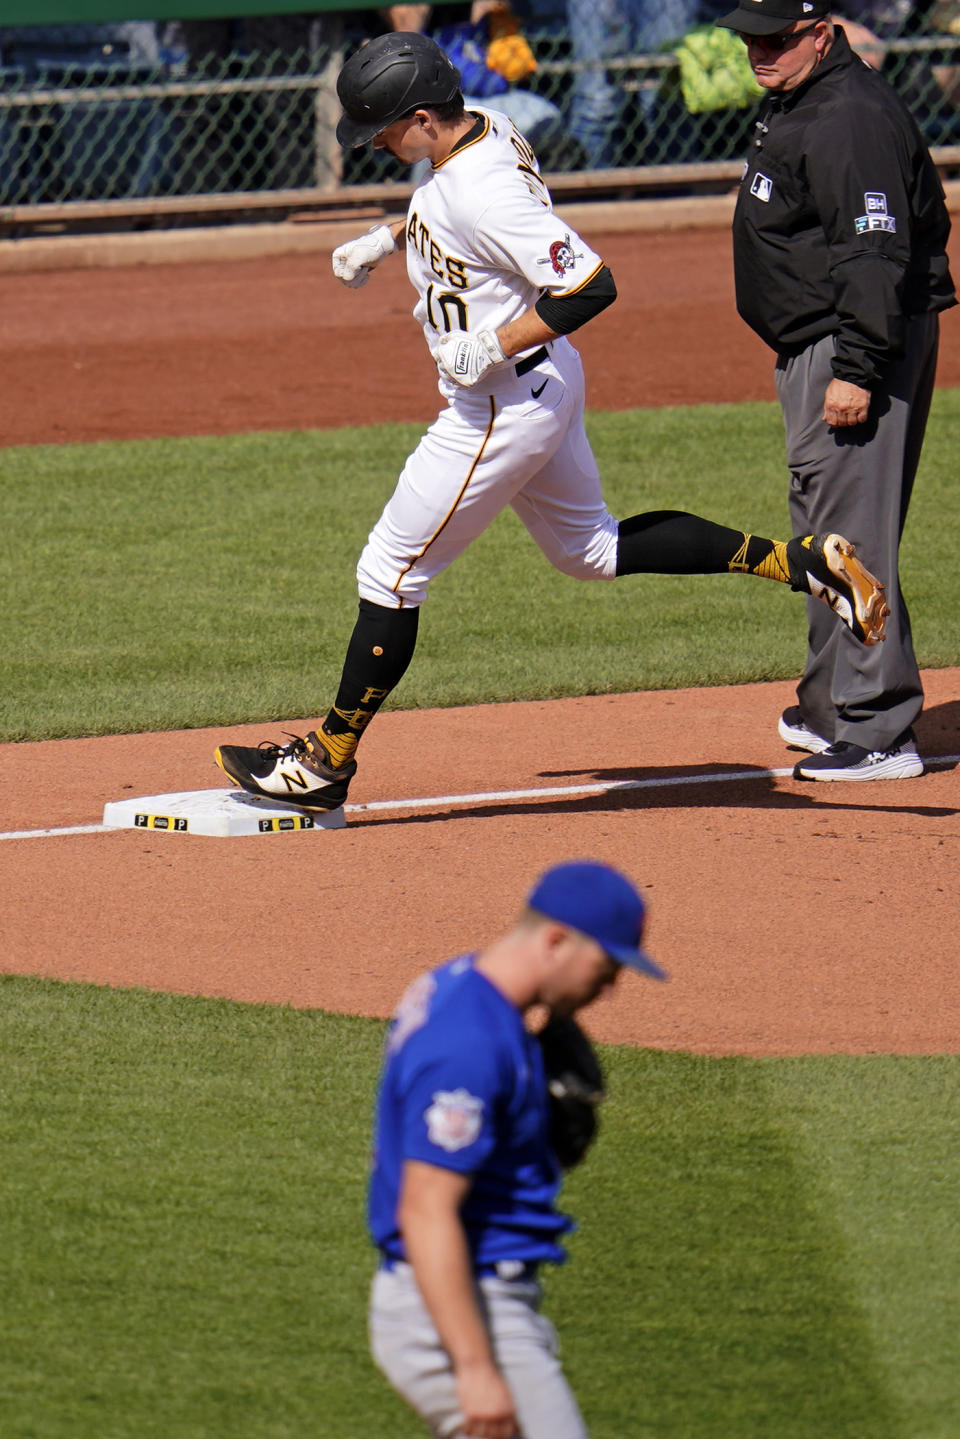 Pittsburgh Pirates' Bryan Reynolds (10) rounds third after hitting a solo home run off Chicago Cubs starting pitcher Adrian Sampson, bottom, during the sixth inning of a baseball game in Pittsburgh, Sunday, Sept. 25, 2022. (AP Photo/Gene J. Puskar)